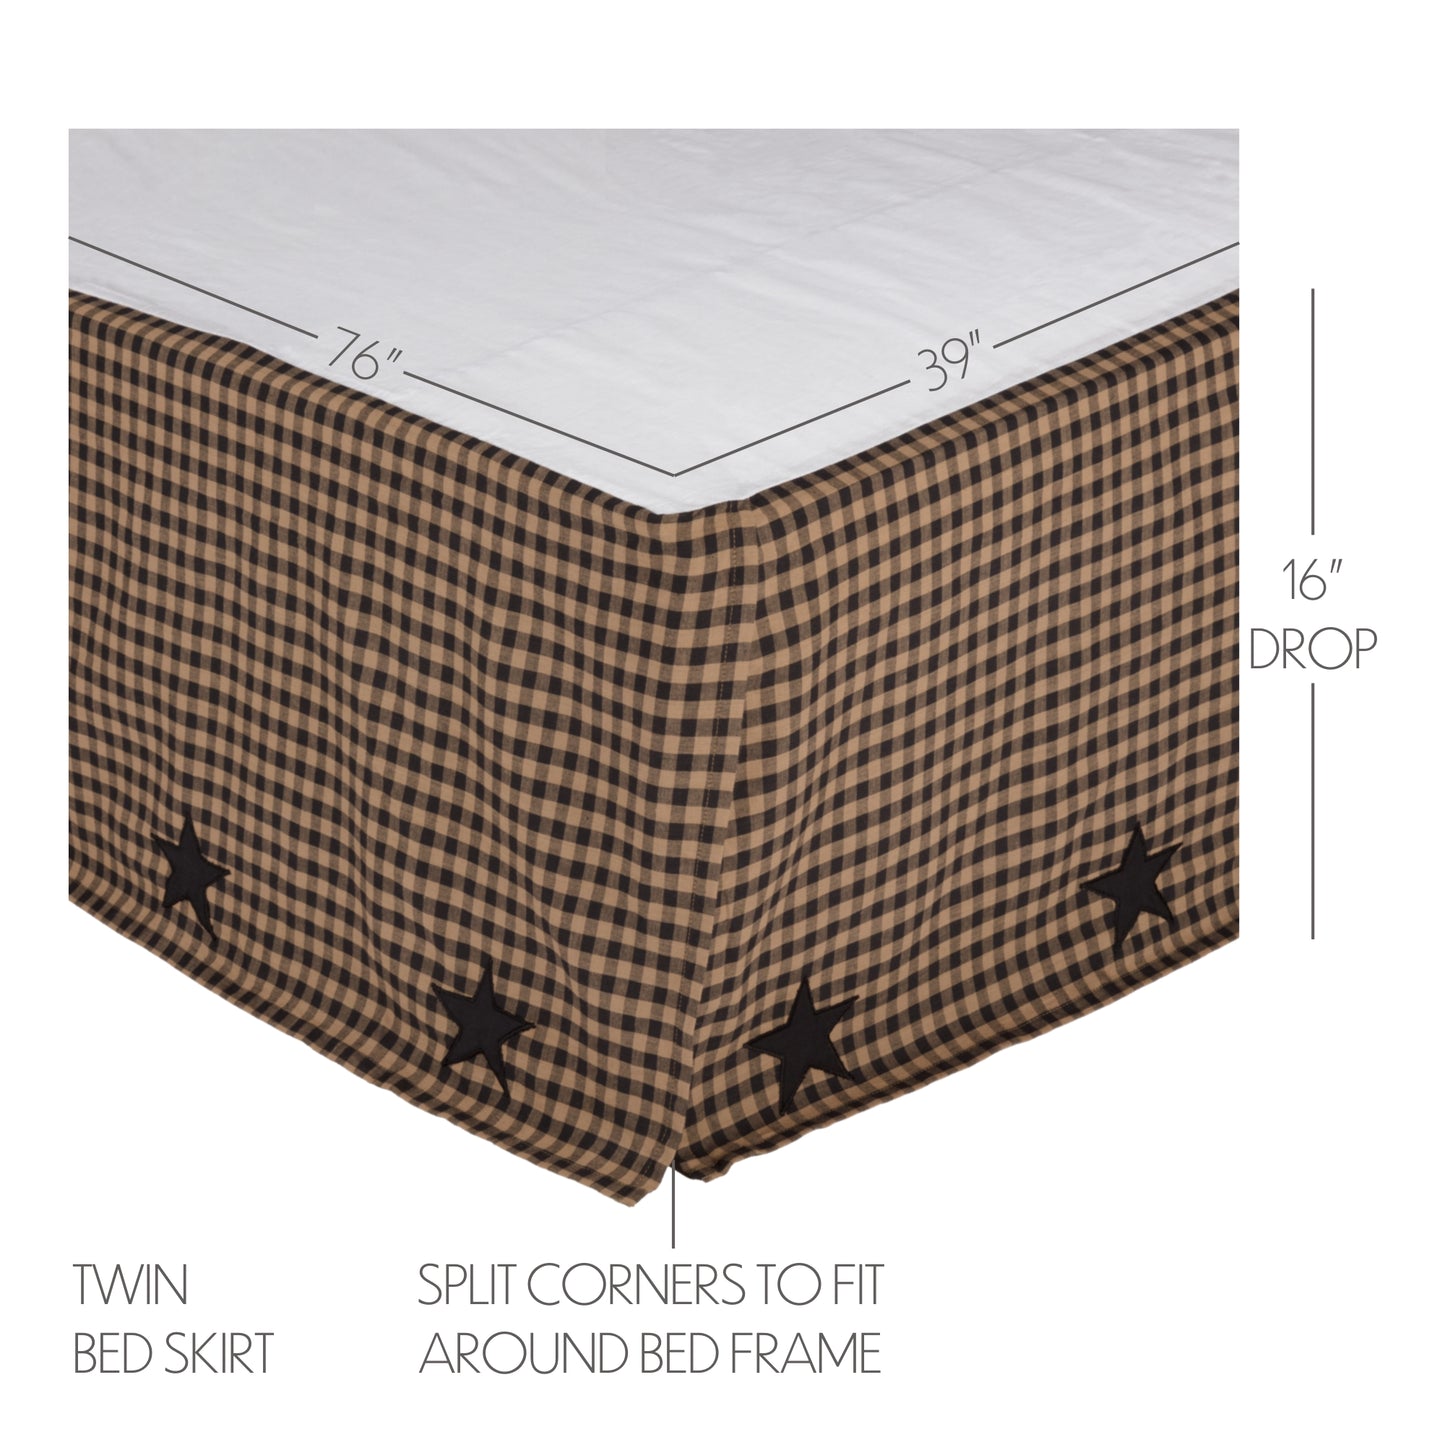 45583-Black-Check-Star-Twin-Bed-Skirt-39x76x16-image-1